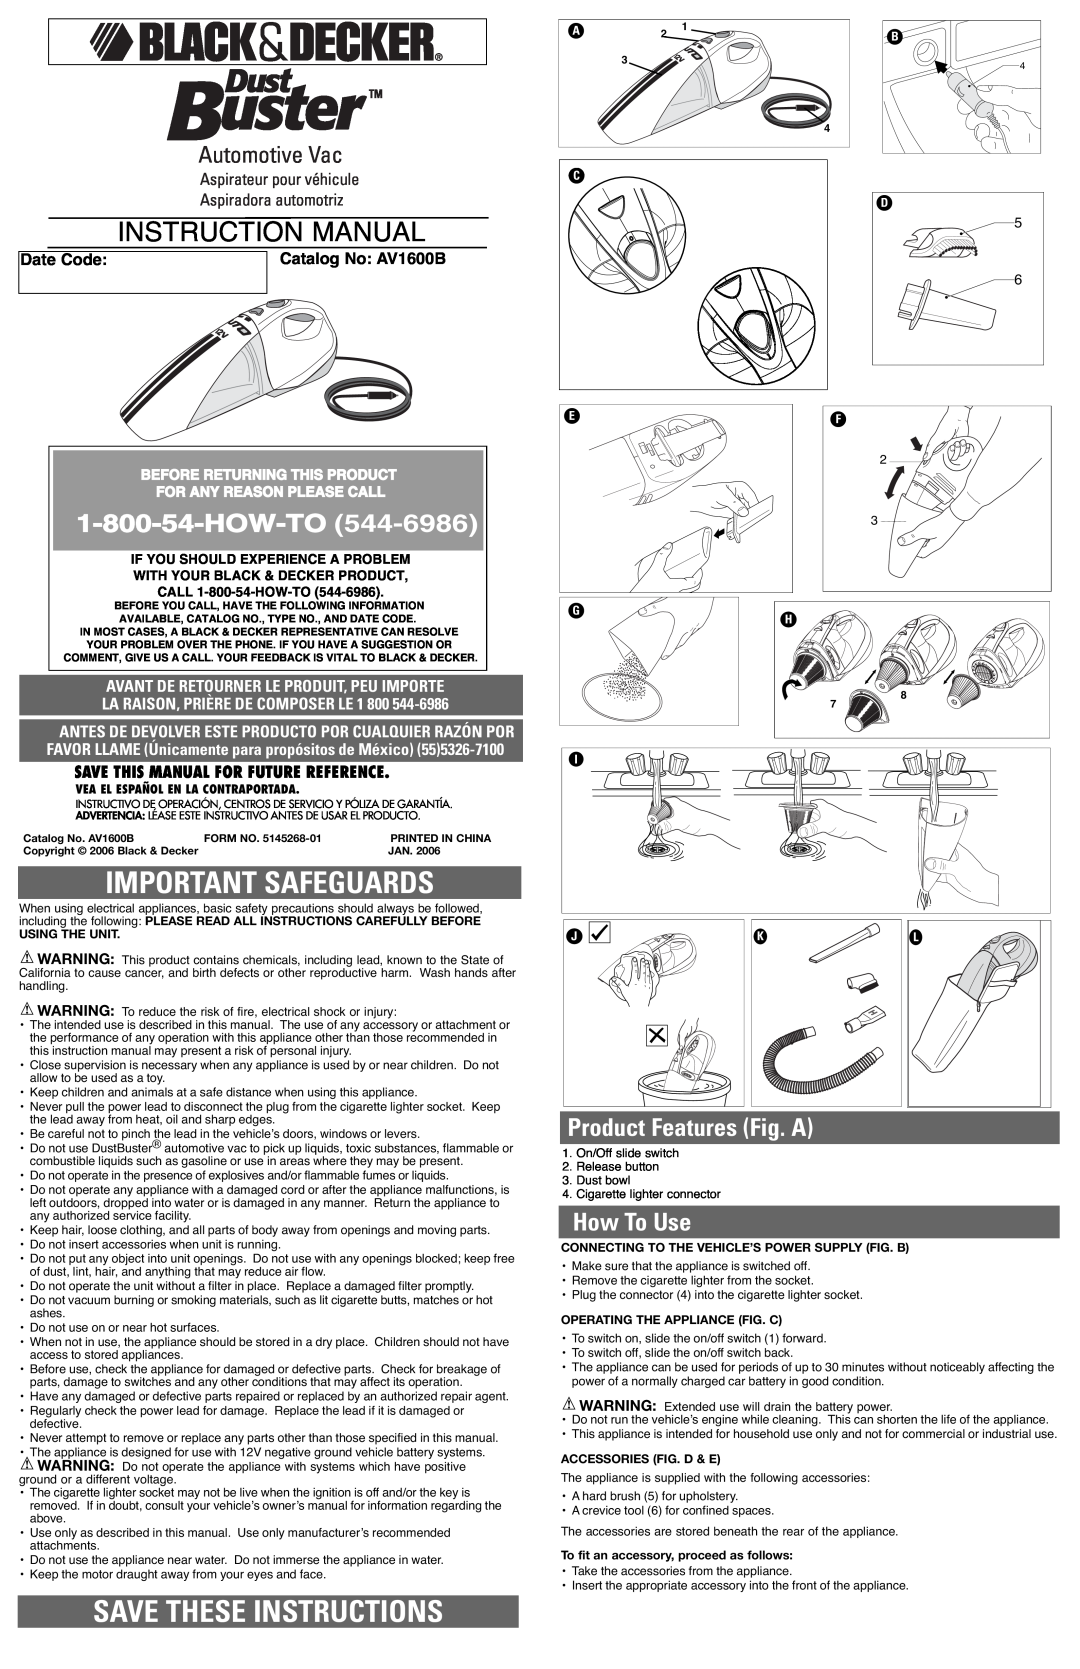 Black & Decker Av1600b instruction manual Important Safeguards, Save These Instructions, Product Features Fig. A, How-To 